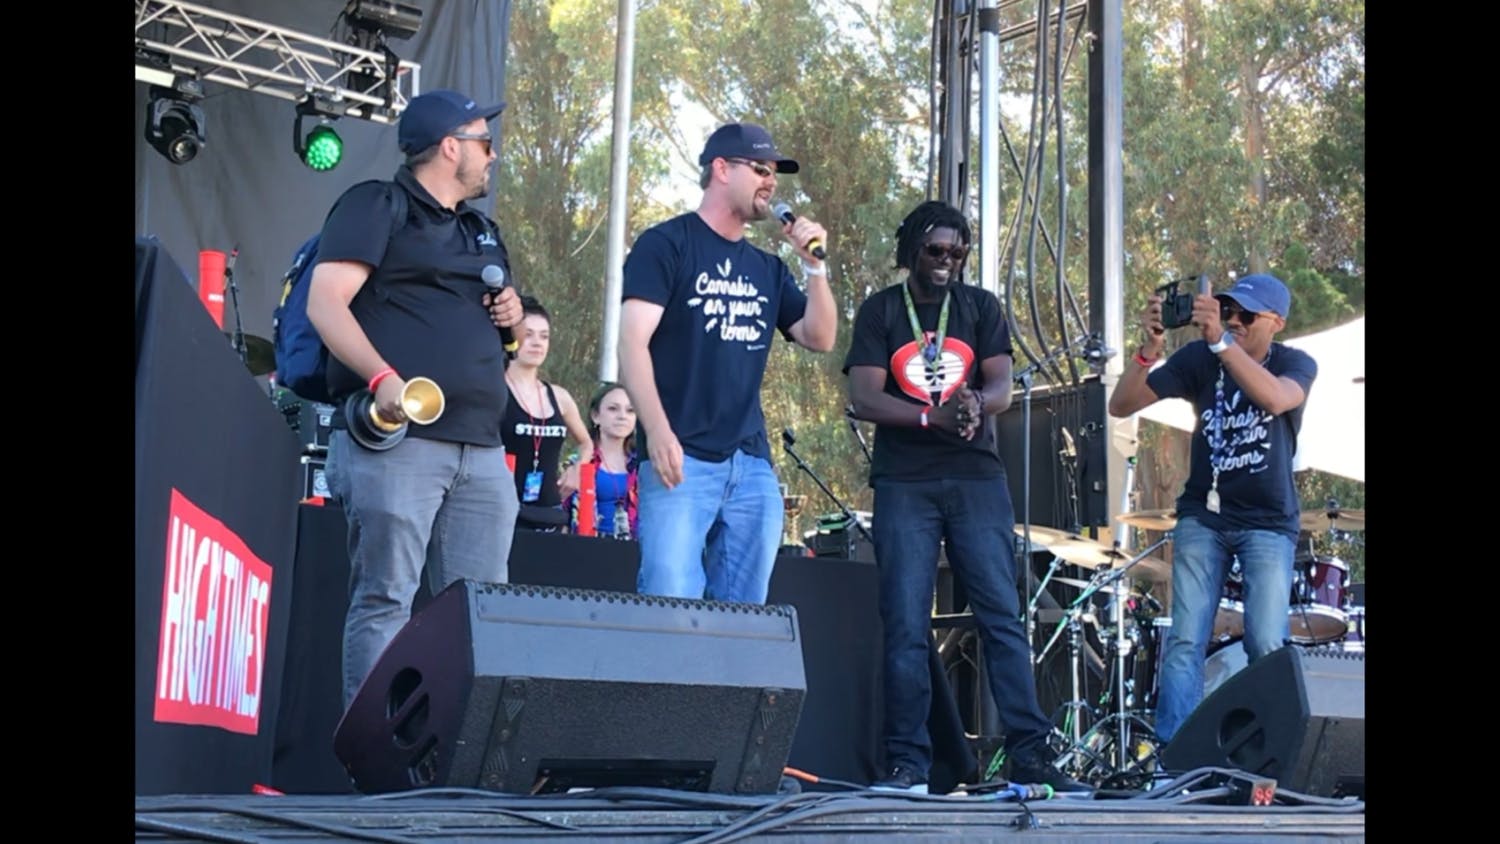 Caliva's cultivation team accepts the award for Best Hybrid Flower at the 2019 High Times Cannabis Cup.